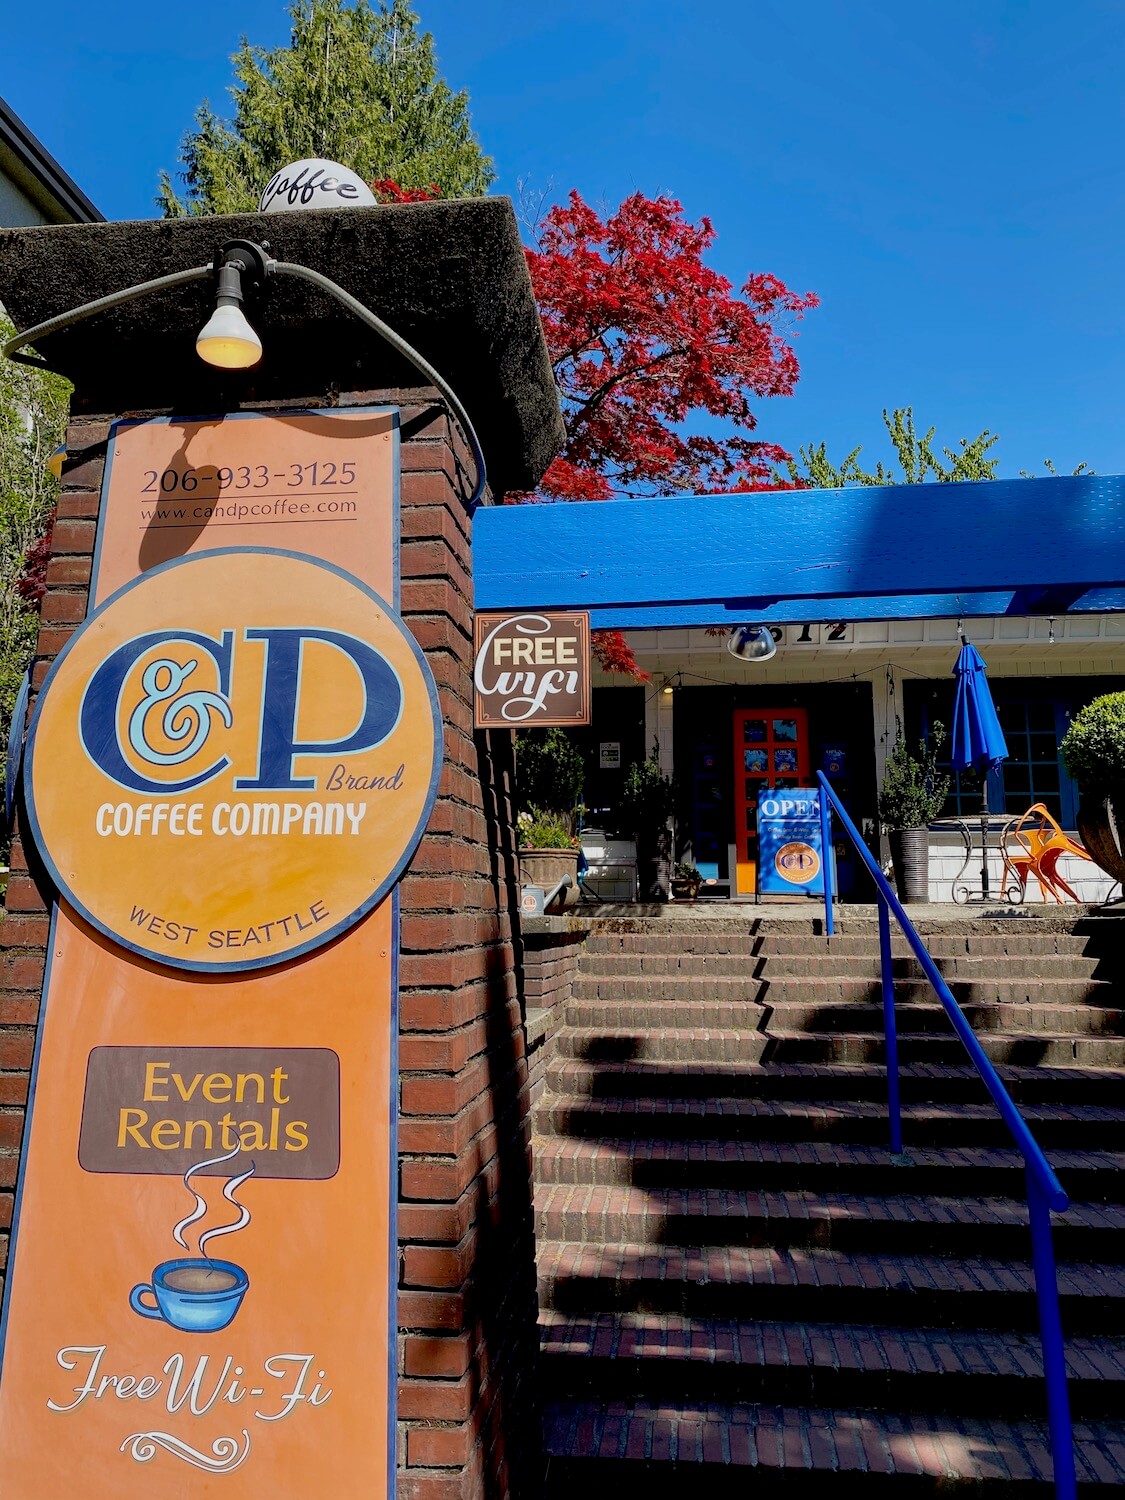 The steps walking up to CP Coffee in West Seattle pass by a large brick entry pillar with an orange sign. In the background there is a bright blue awning and tiny window paned door with orange trim. A pine tree and bright red maple light up the sky, along with the bright blue.